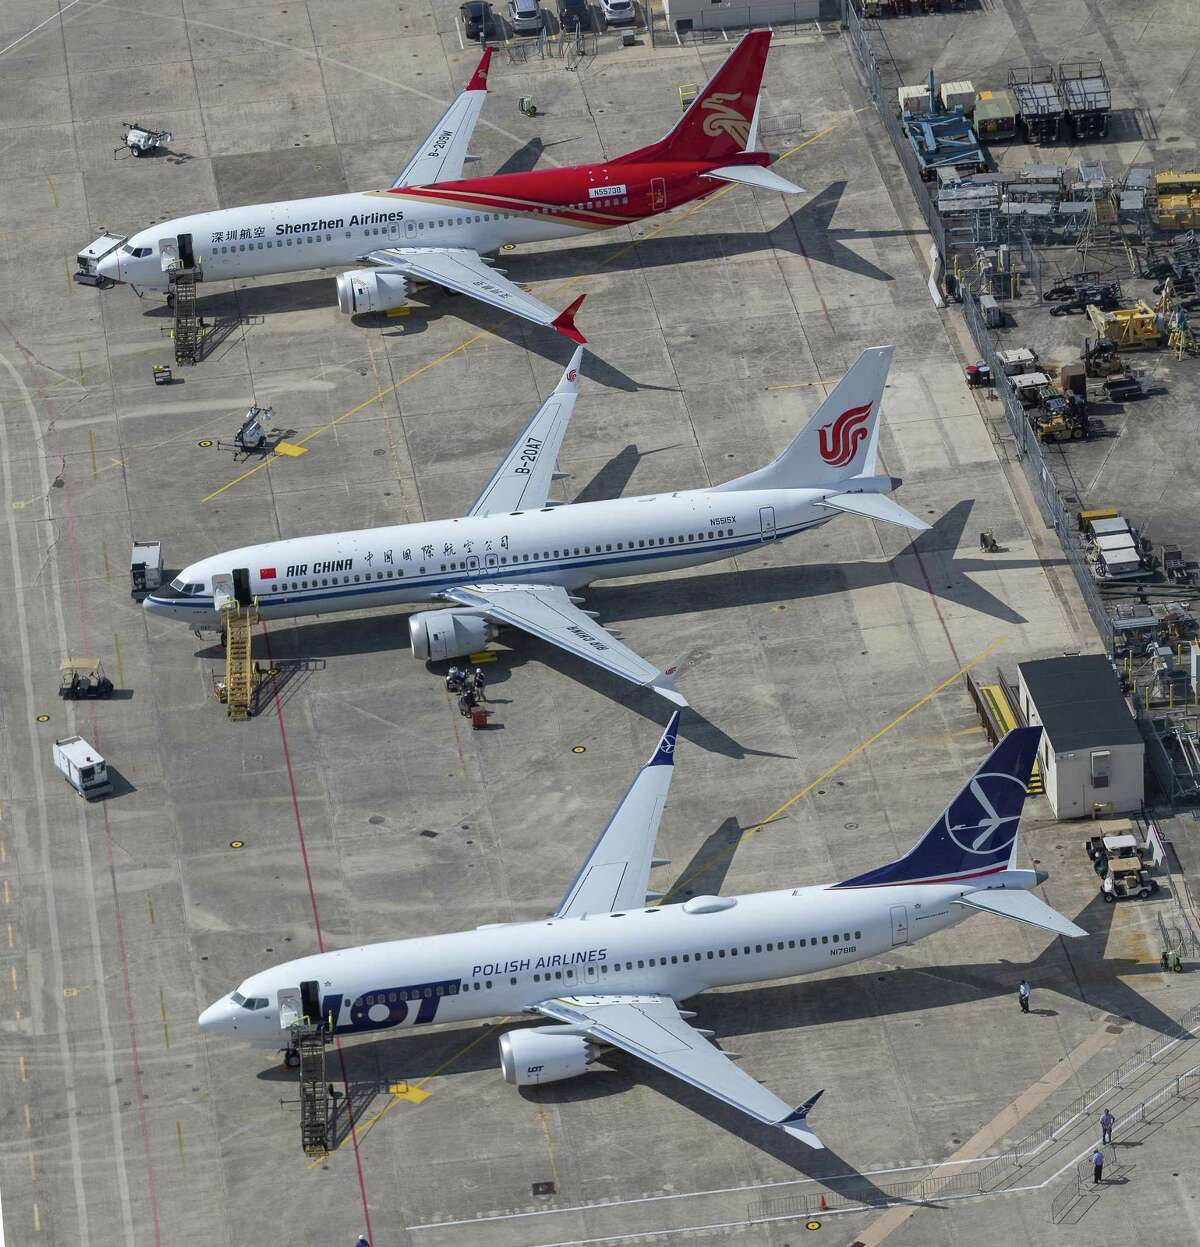 Three Boeing 737 Max aircraft sit Thursday, May 16, 2019 on the ramp at Boeing's maintenance facility in San Antonio as ballooning inventory at the company's Seattle plant is forcing Boeing to store planes at their Port San Antonio maintenance facility. Boeing continues to build new 737 Max aircraft even as it tries to solve safety issues that caused the fleet to be grounded world-wide after two aircraft crashed. Boeing can not deliver the new aircraft to customers until the safety issues are resolved.